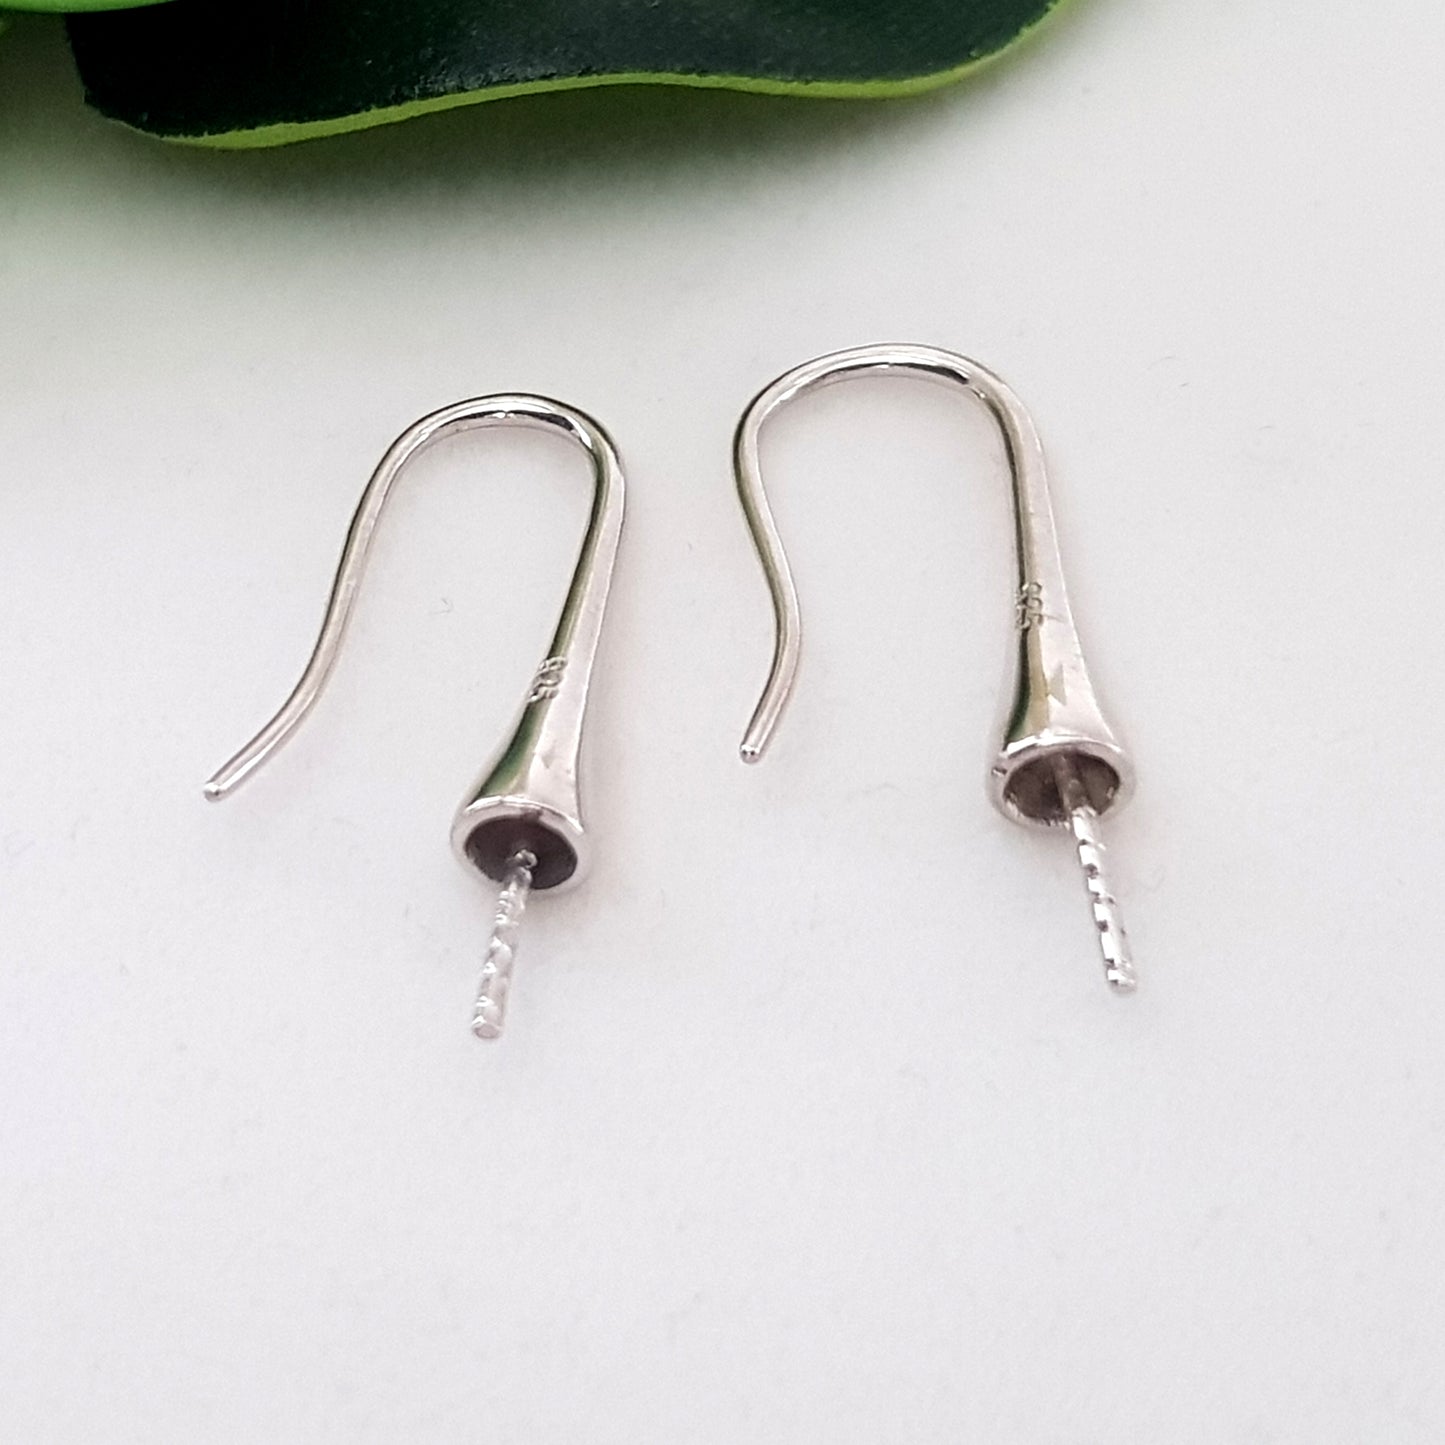 Quality Solid Sterling Silver Earring Hooks with 4mm Pearl Cup | SS-031PC4EH-1 | Earring Findings